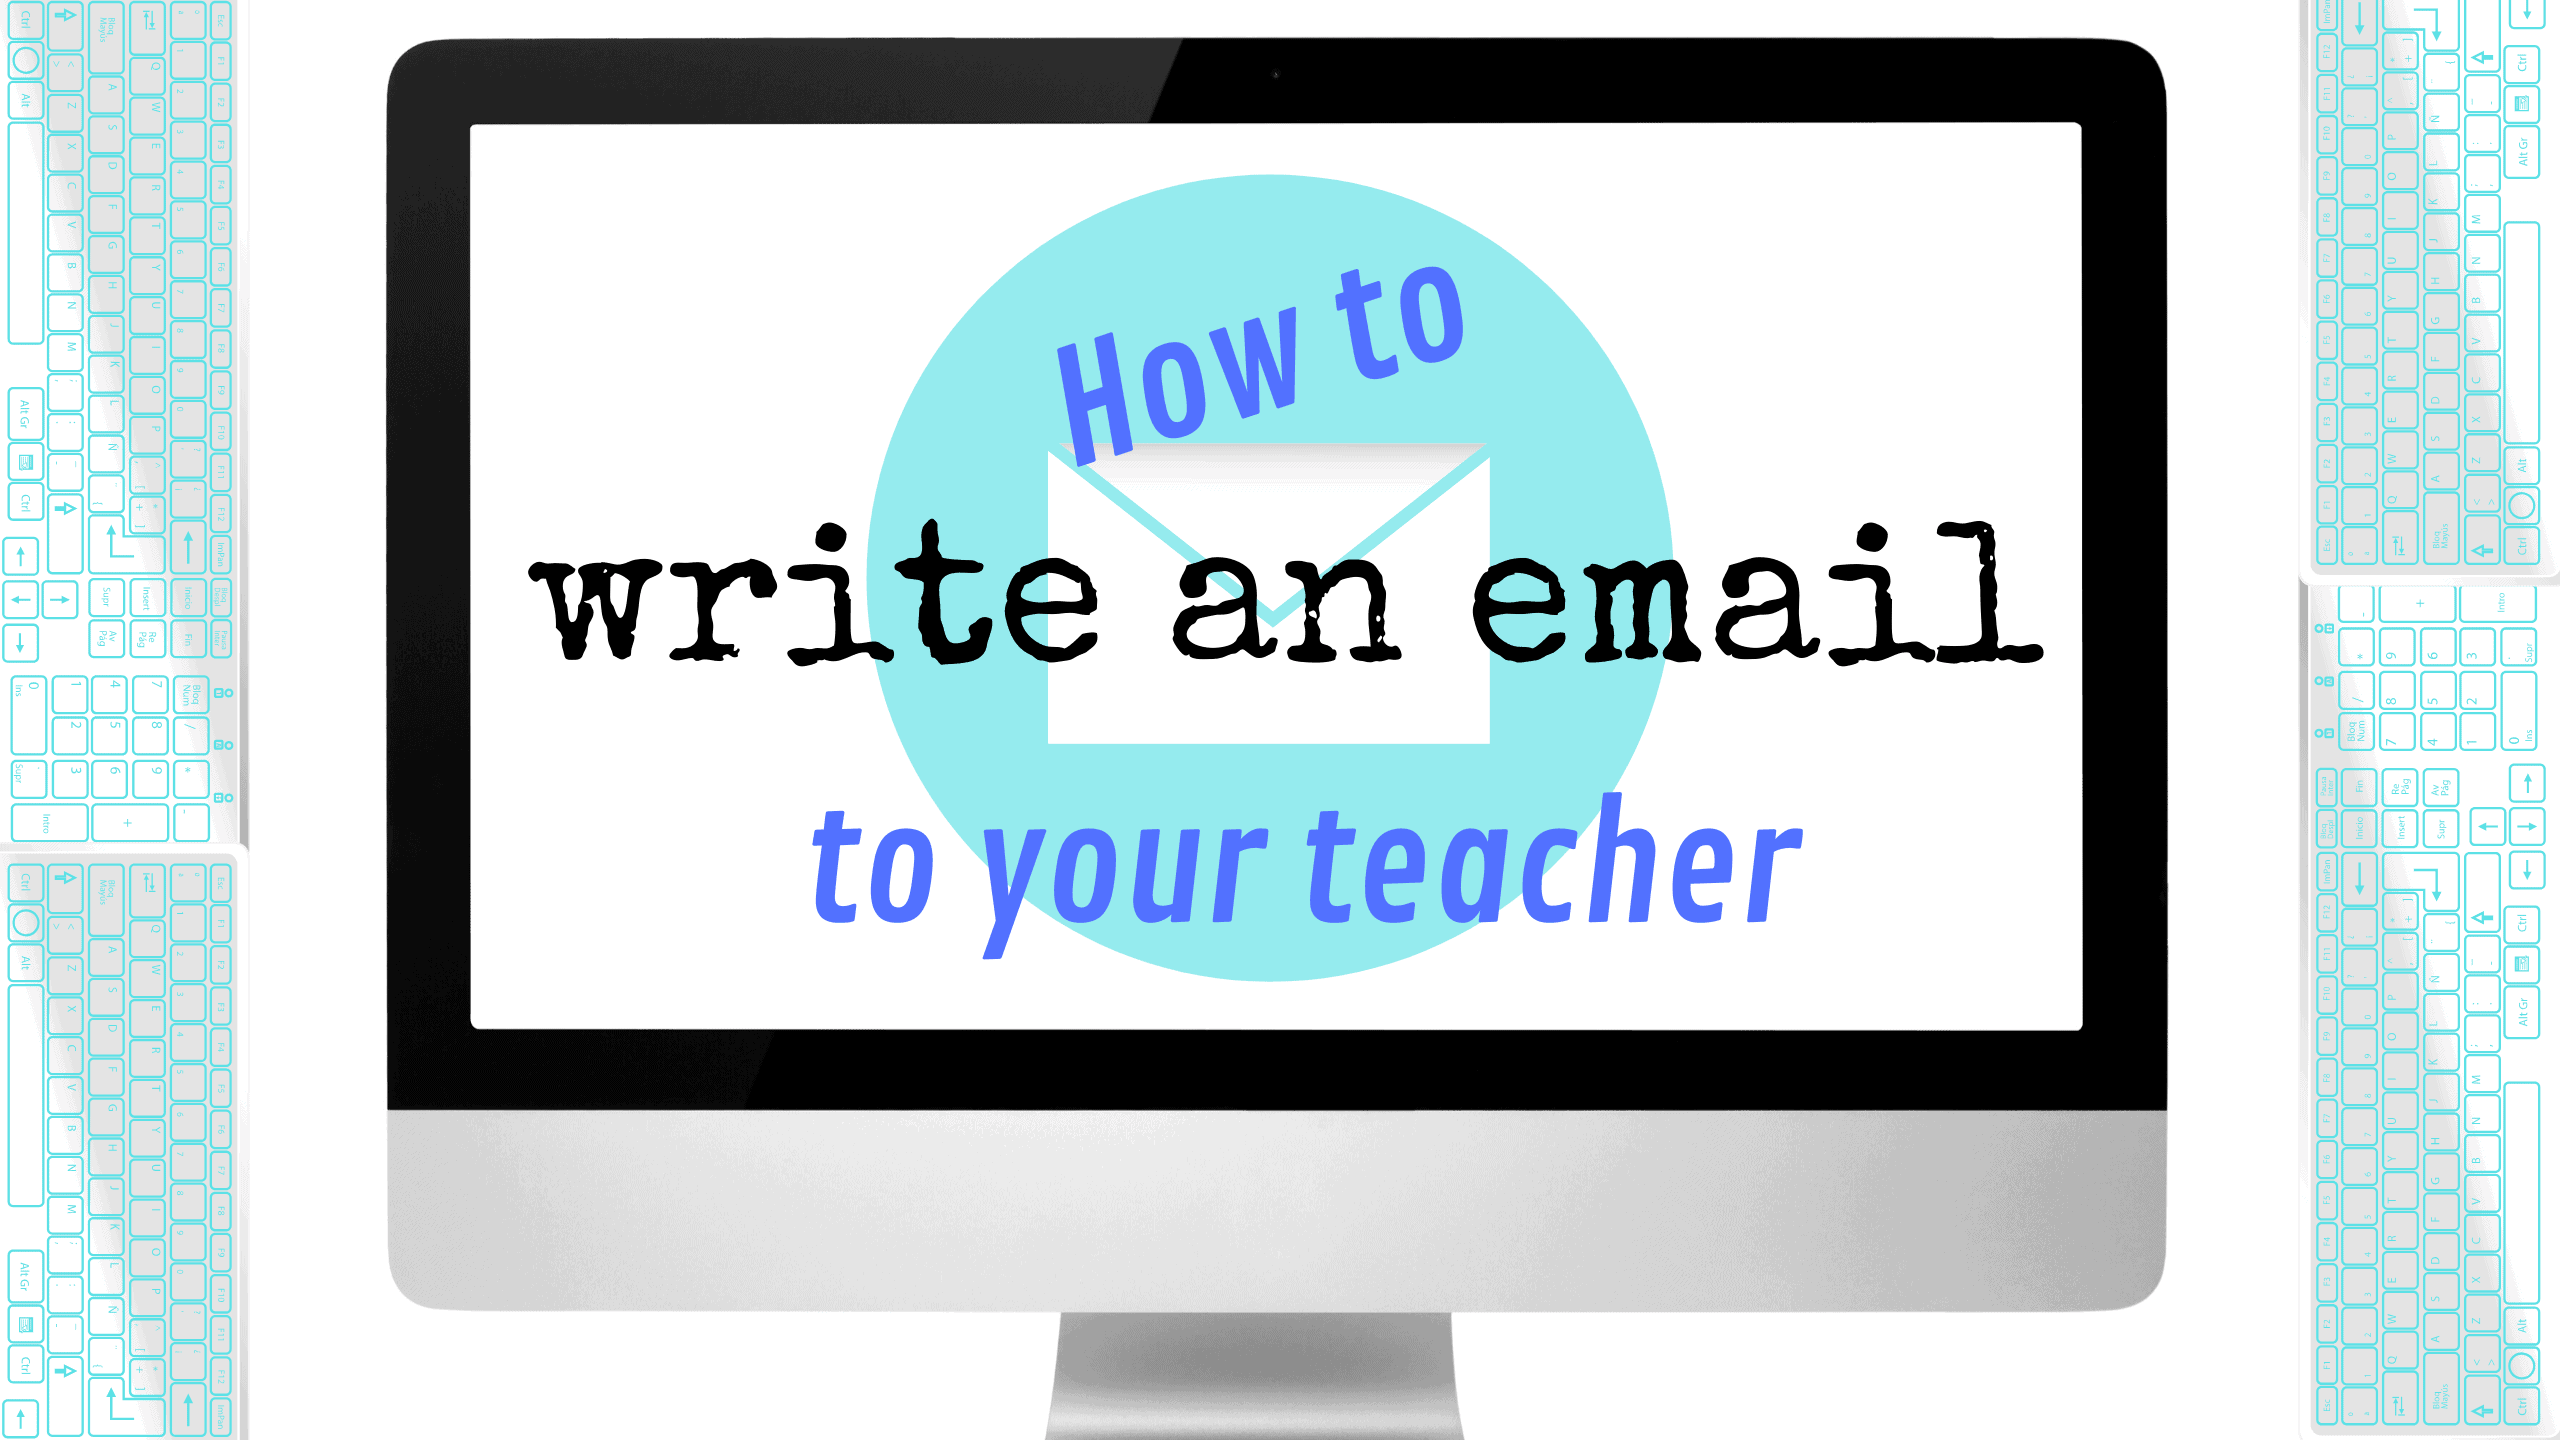 How to write an email to your teacher: Tips, rules and examples